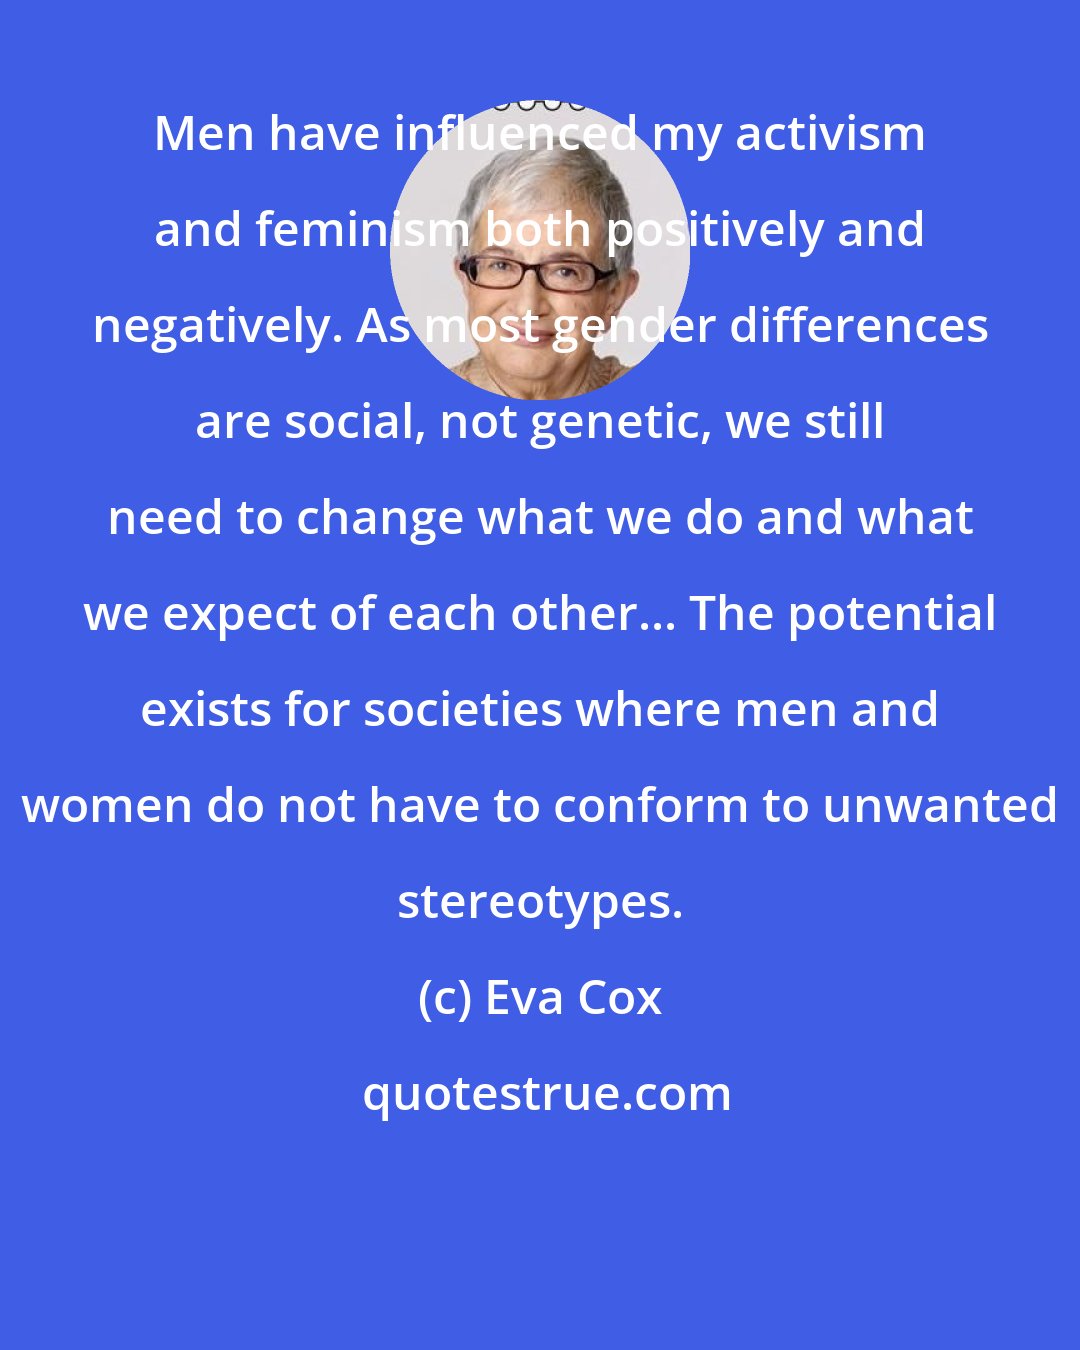 Eva Cox: Men have influenced my activism and feminism both positively and negatively. As most gender differences are social, not genetic, we still need to change what we do and what we expect of each other... The potential exists for societies where men and women do not have to conform to unwanted stereotypes.